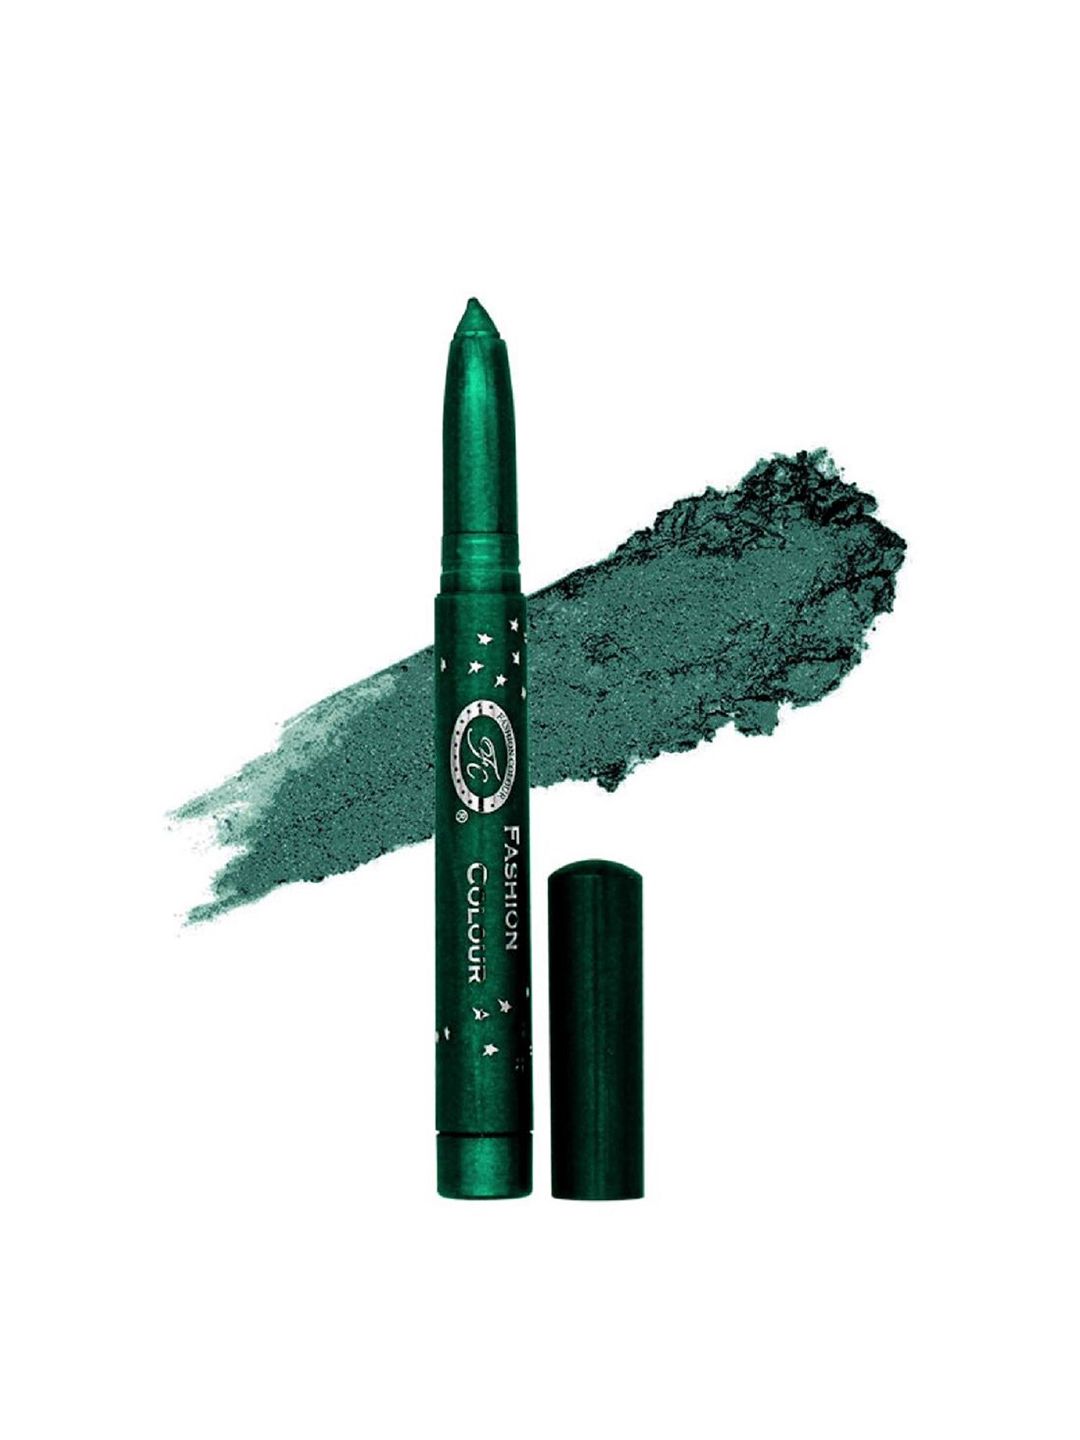 Fashion Colour German Eyeshadow 1.4 g - Forest Green 07 Price in India